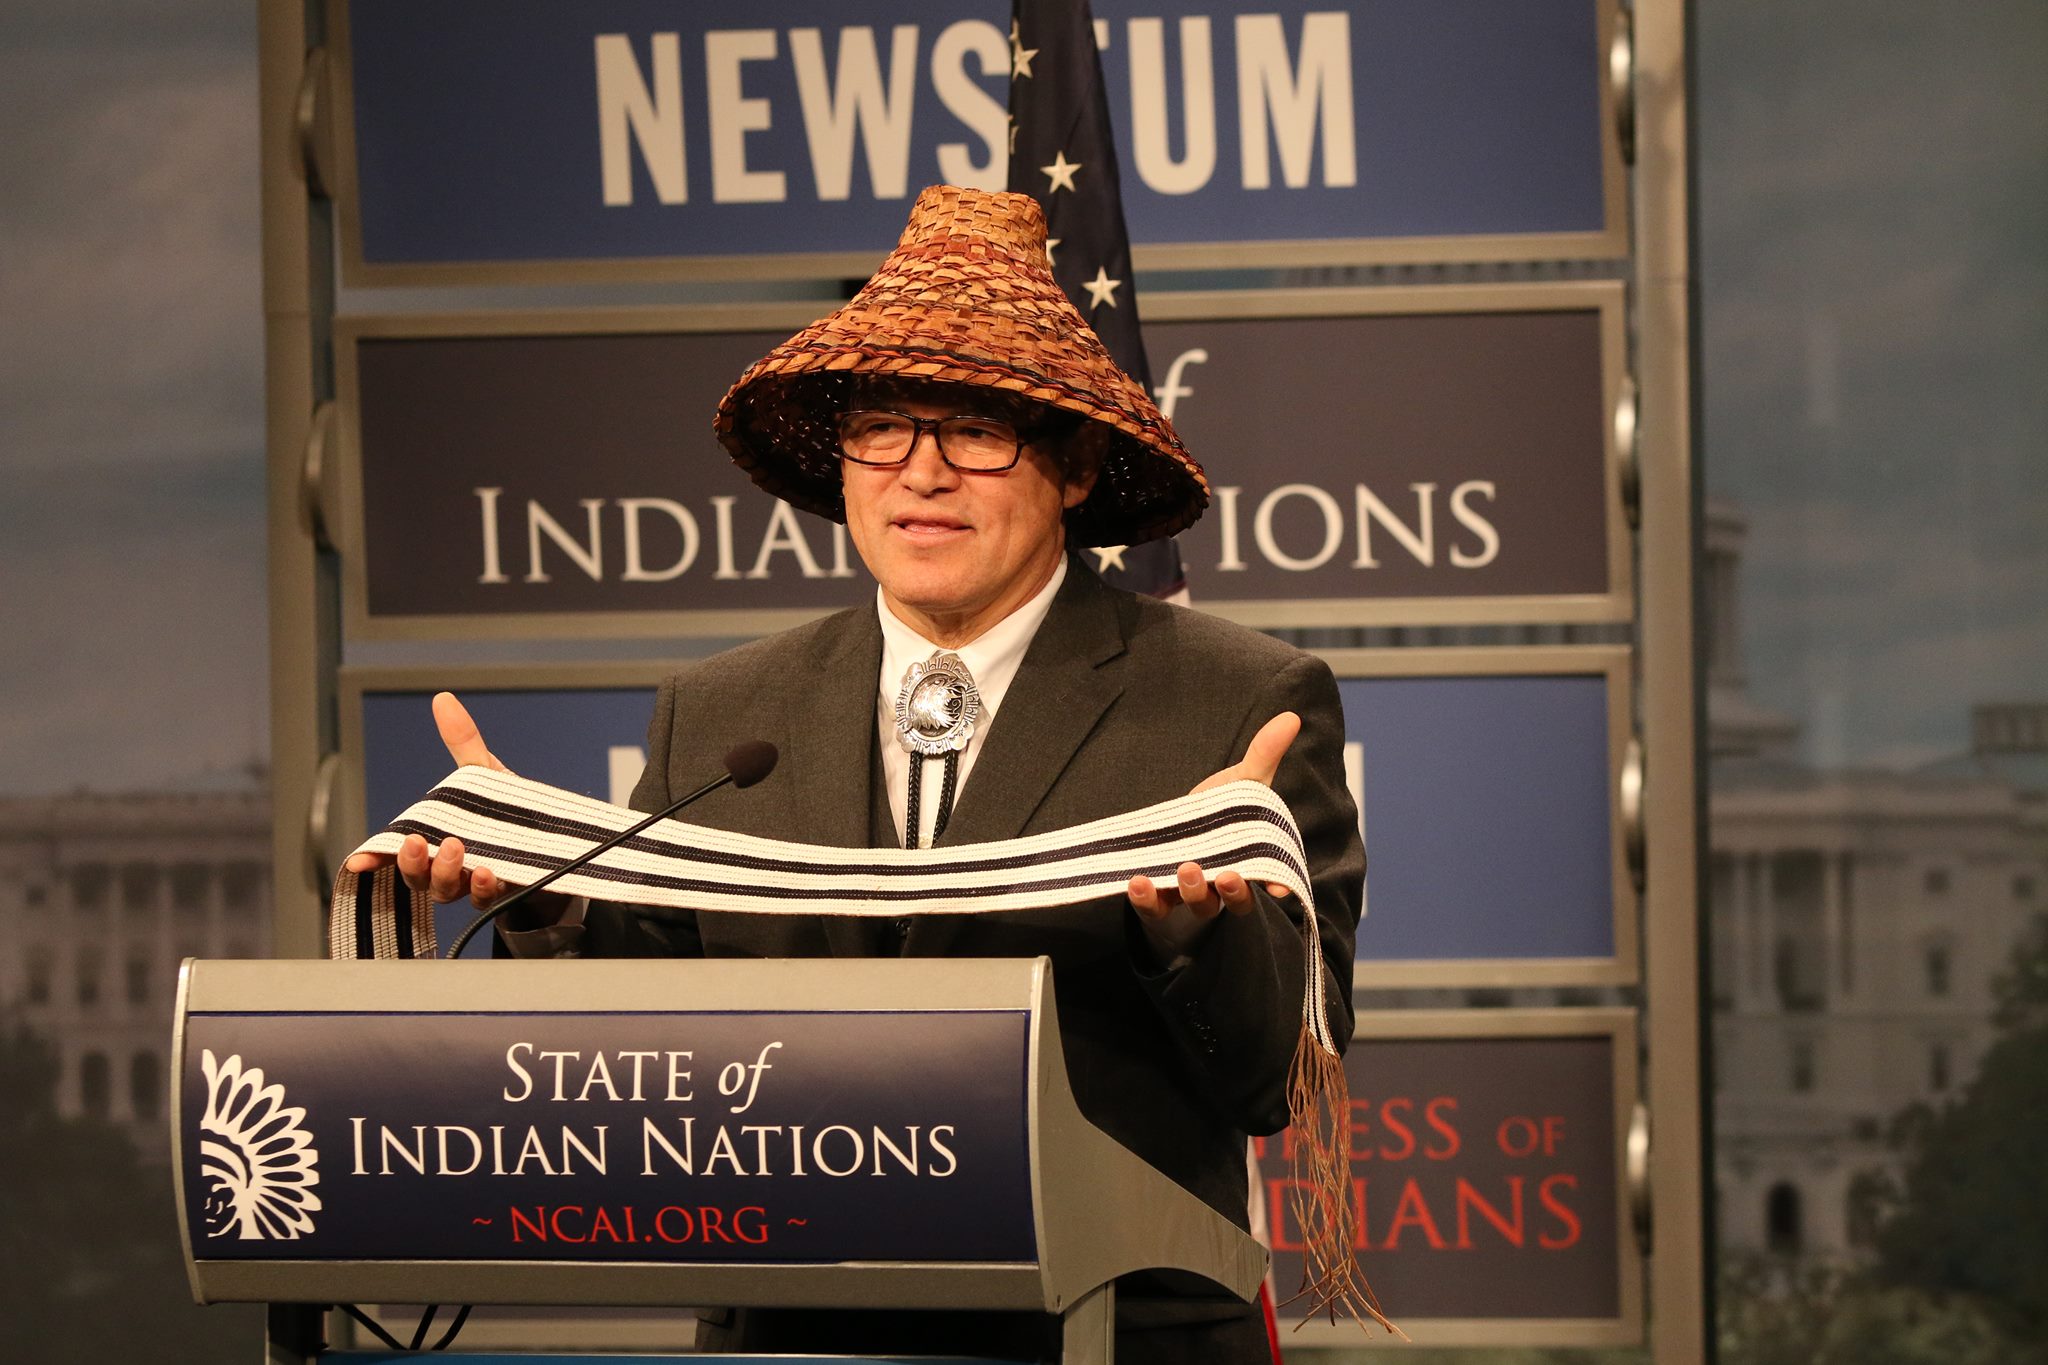 NCAI responds to criticism from Rep. Young on land-into-trust